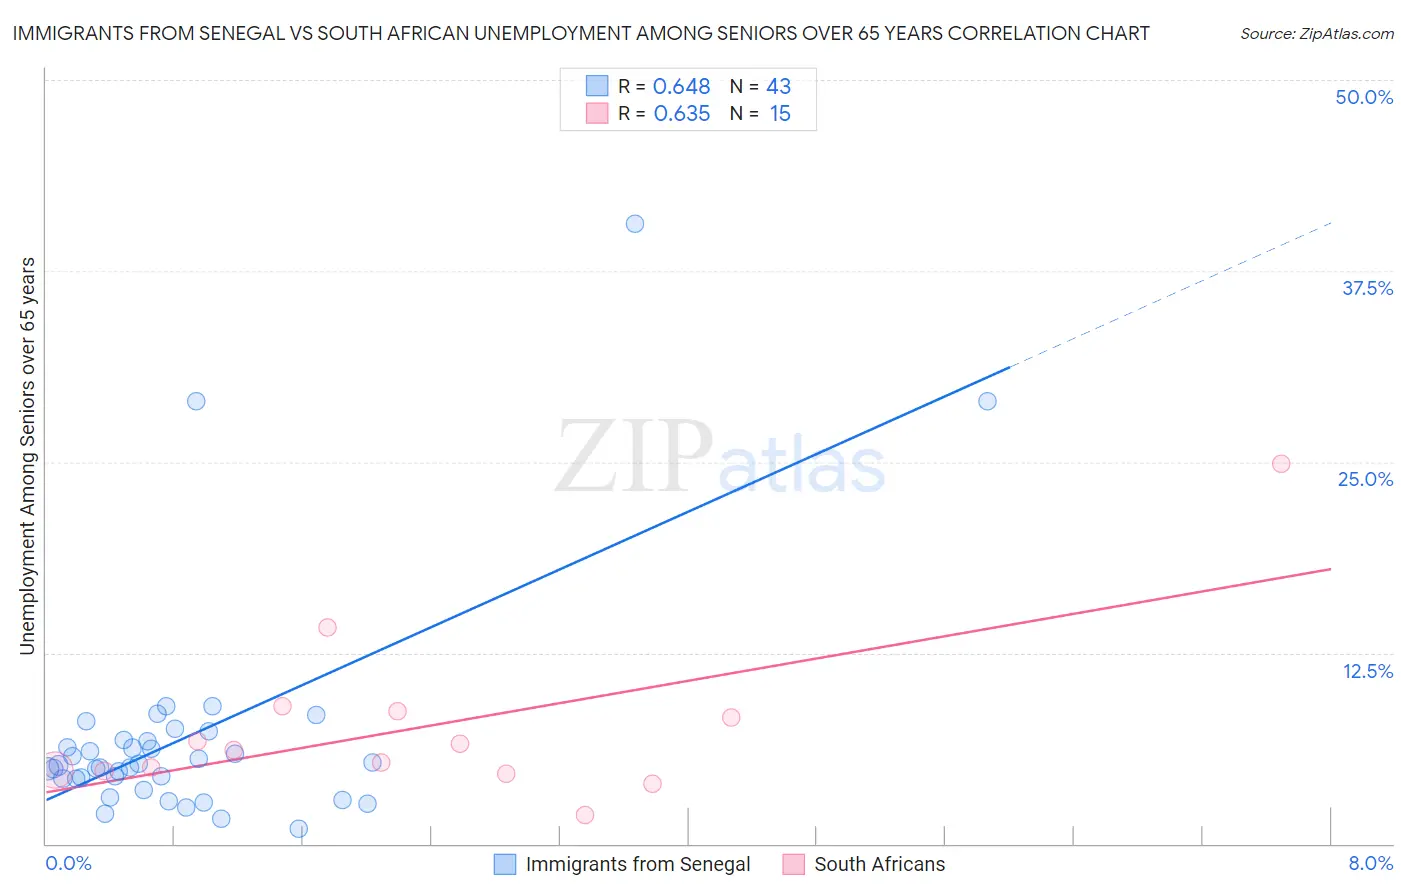 Immigrants from Senegal vs South African Unemployment Among Seniors over 65 years